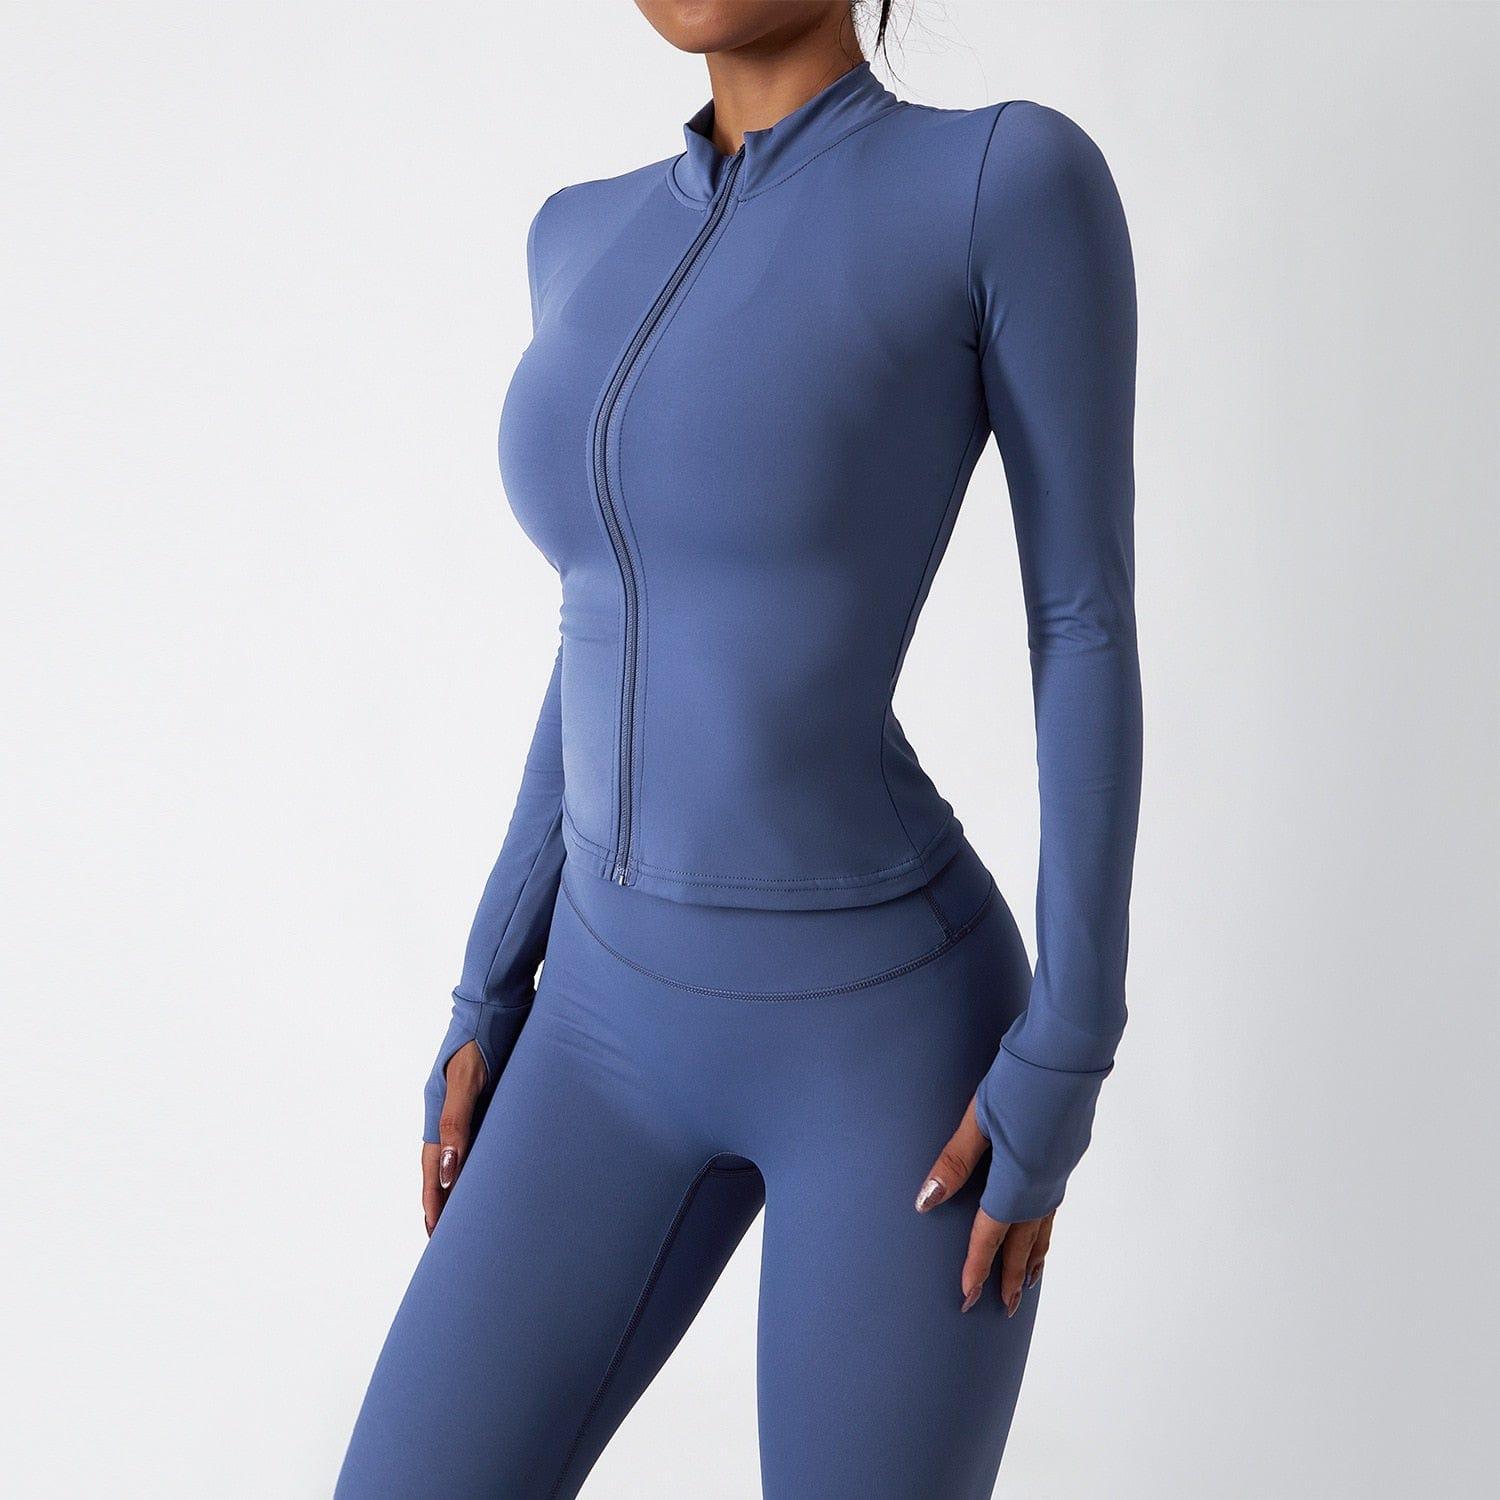 Shop 0 blue coat set / S / China 2 Piece Yoga Suits Yoga Clothes Women High Waist Leggings Zipper Long Sleeves Gym Workout Fitness Clothes Set Running Sportswear Mademoiselle Home Decor